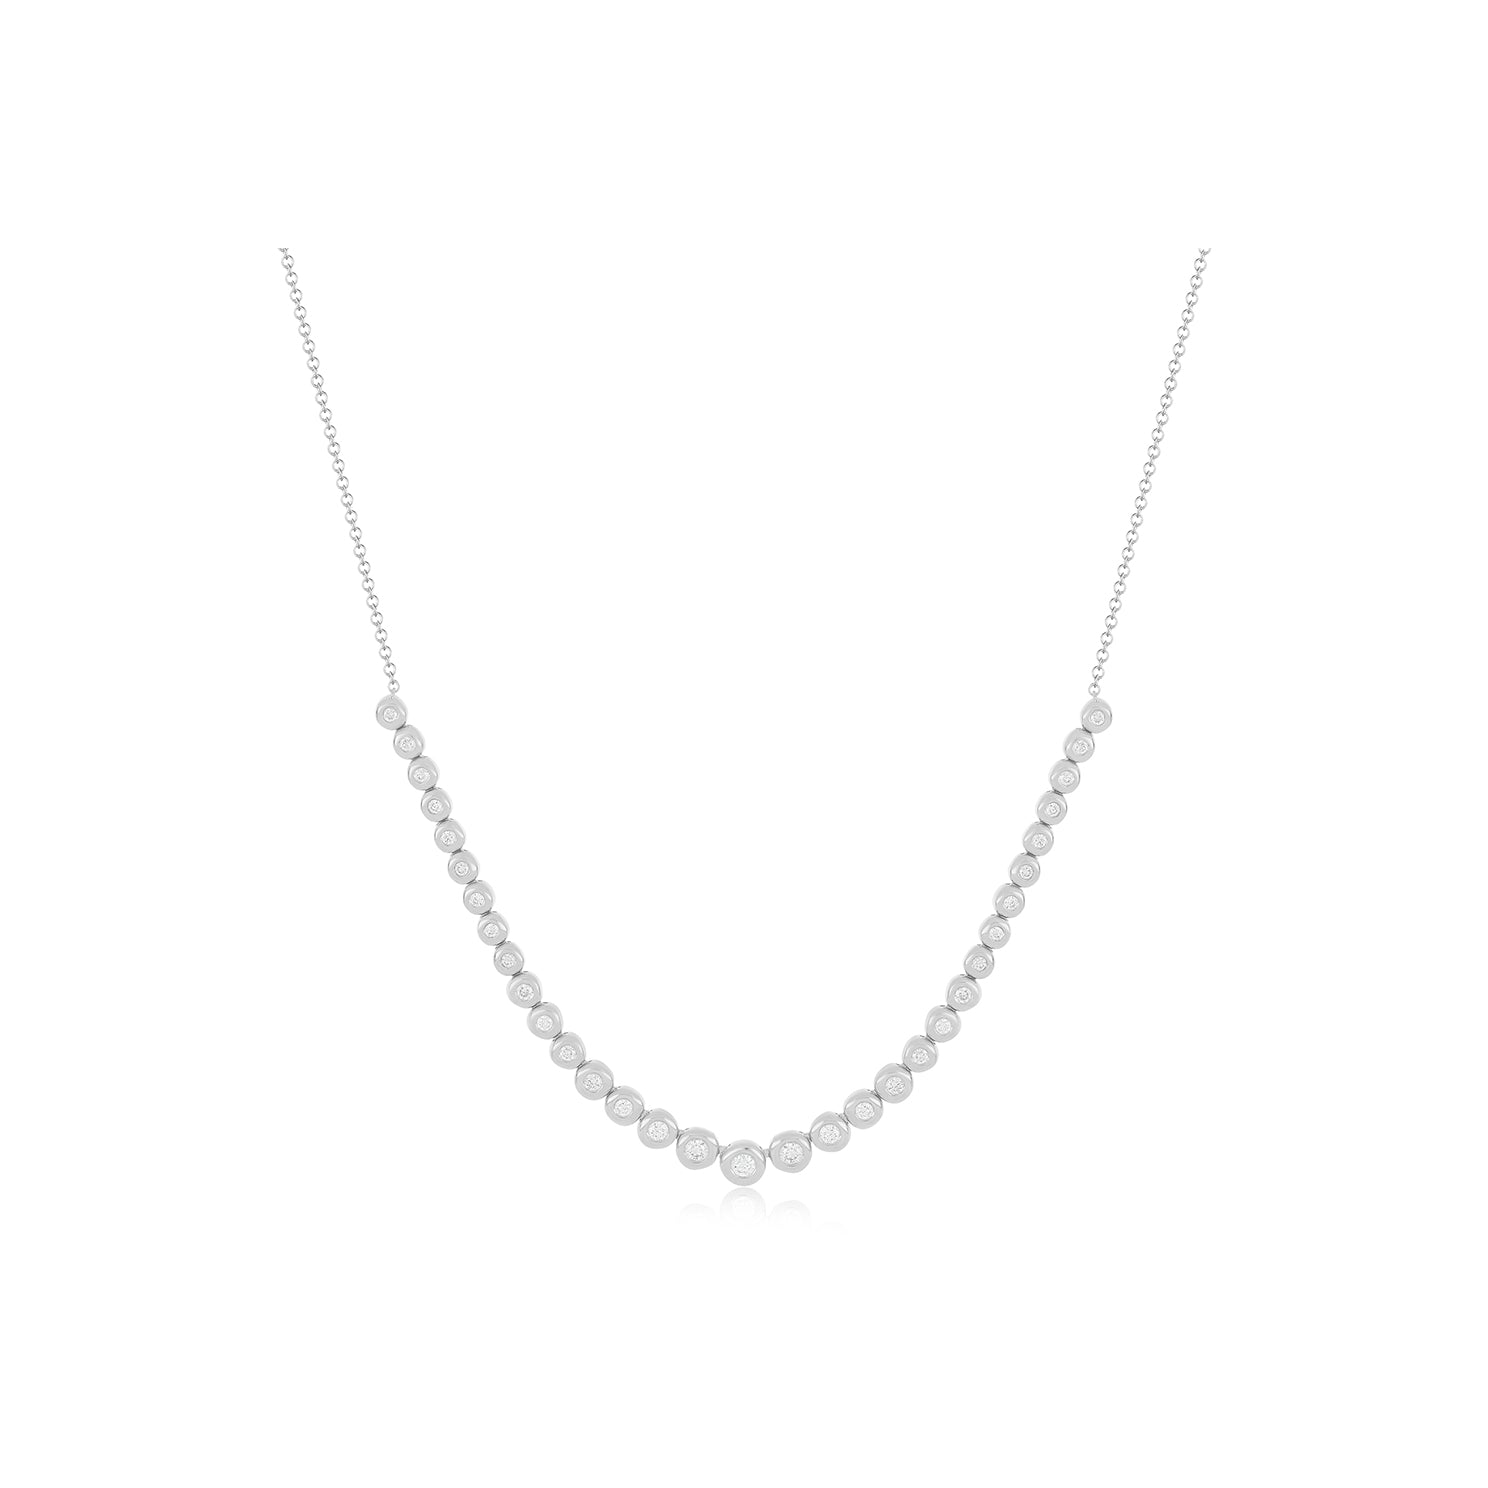 Graduated Diamond Pillow Necklace in 14k white gold